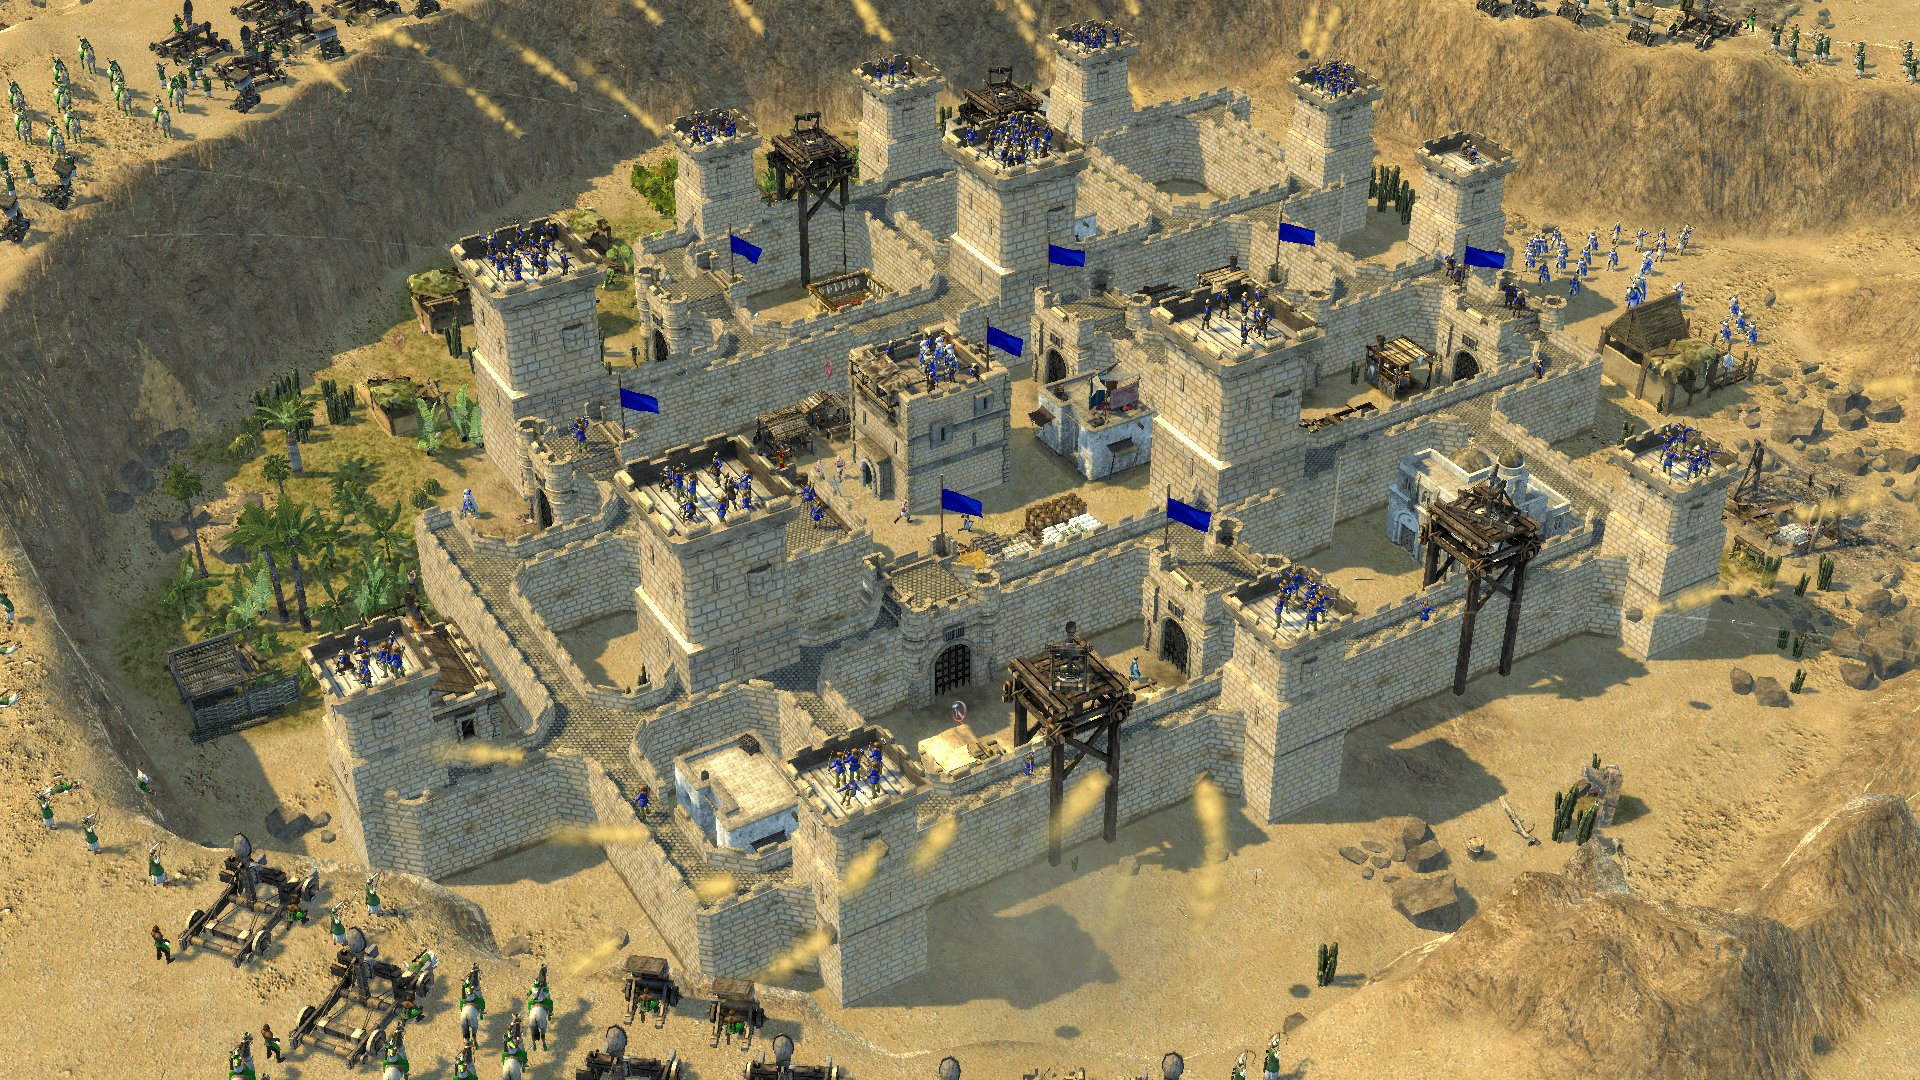 Stronghold Crusader 2 Special Edition 3